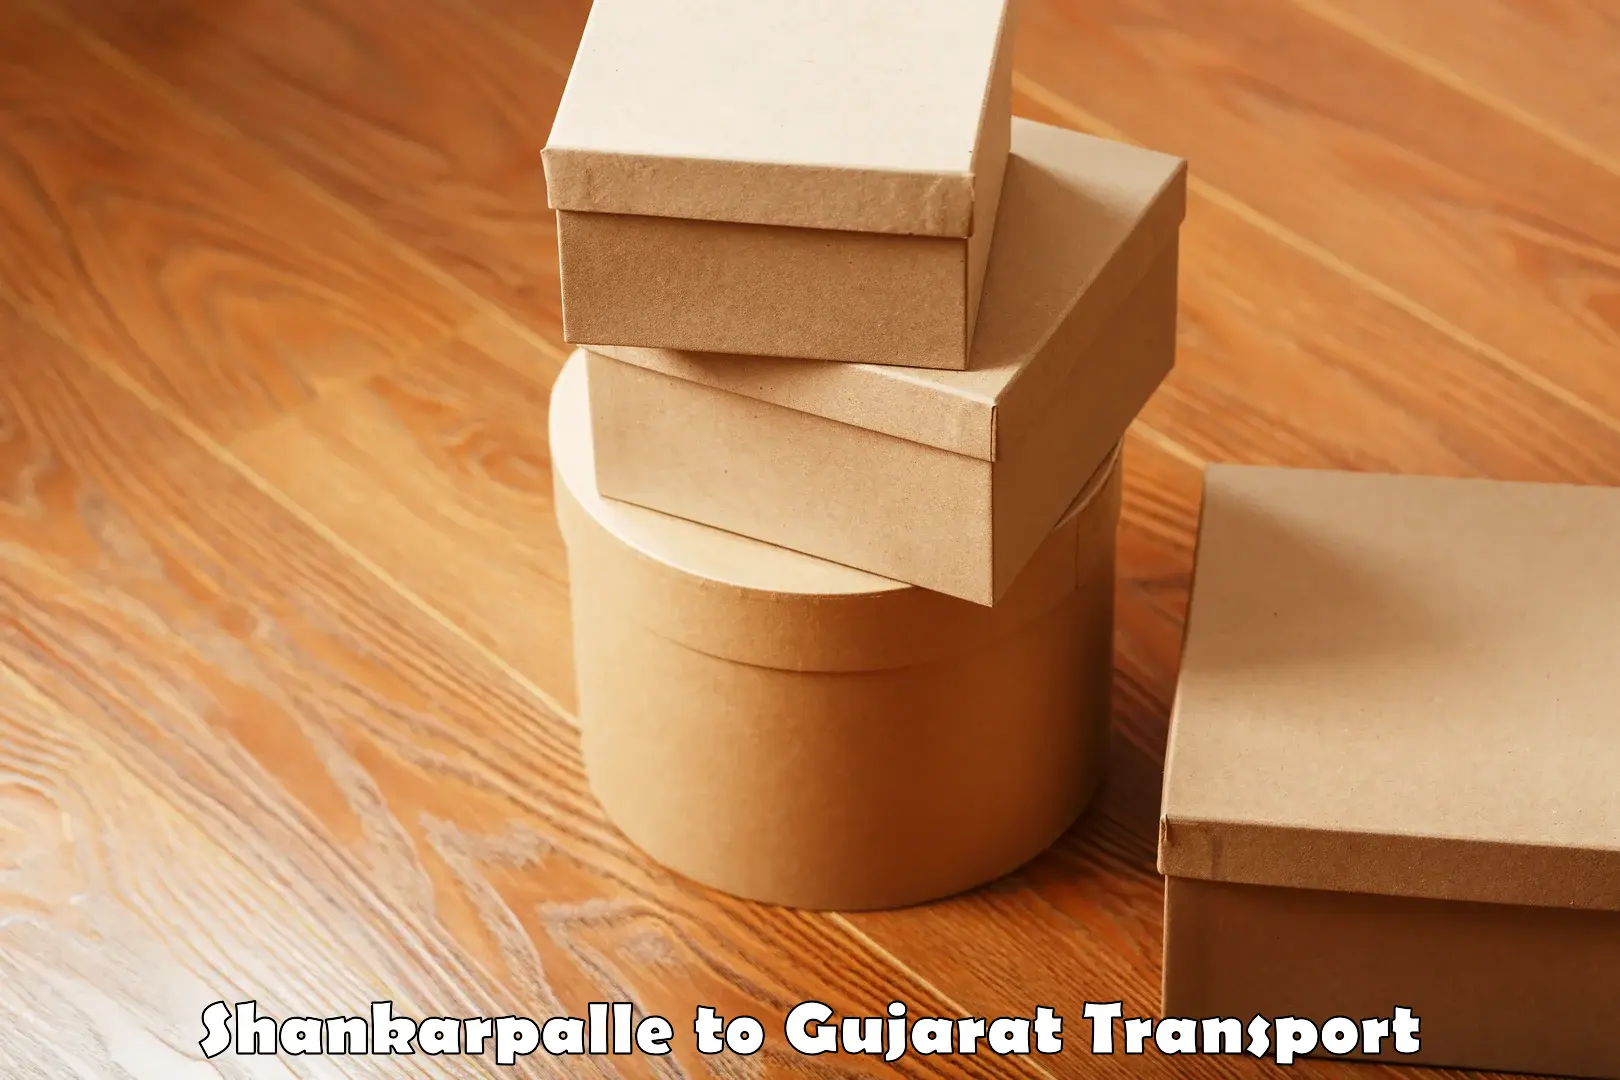 Delivery service Shankarpalle to Patan Gujarat